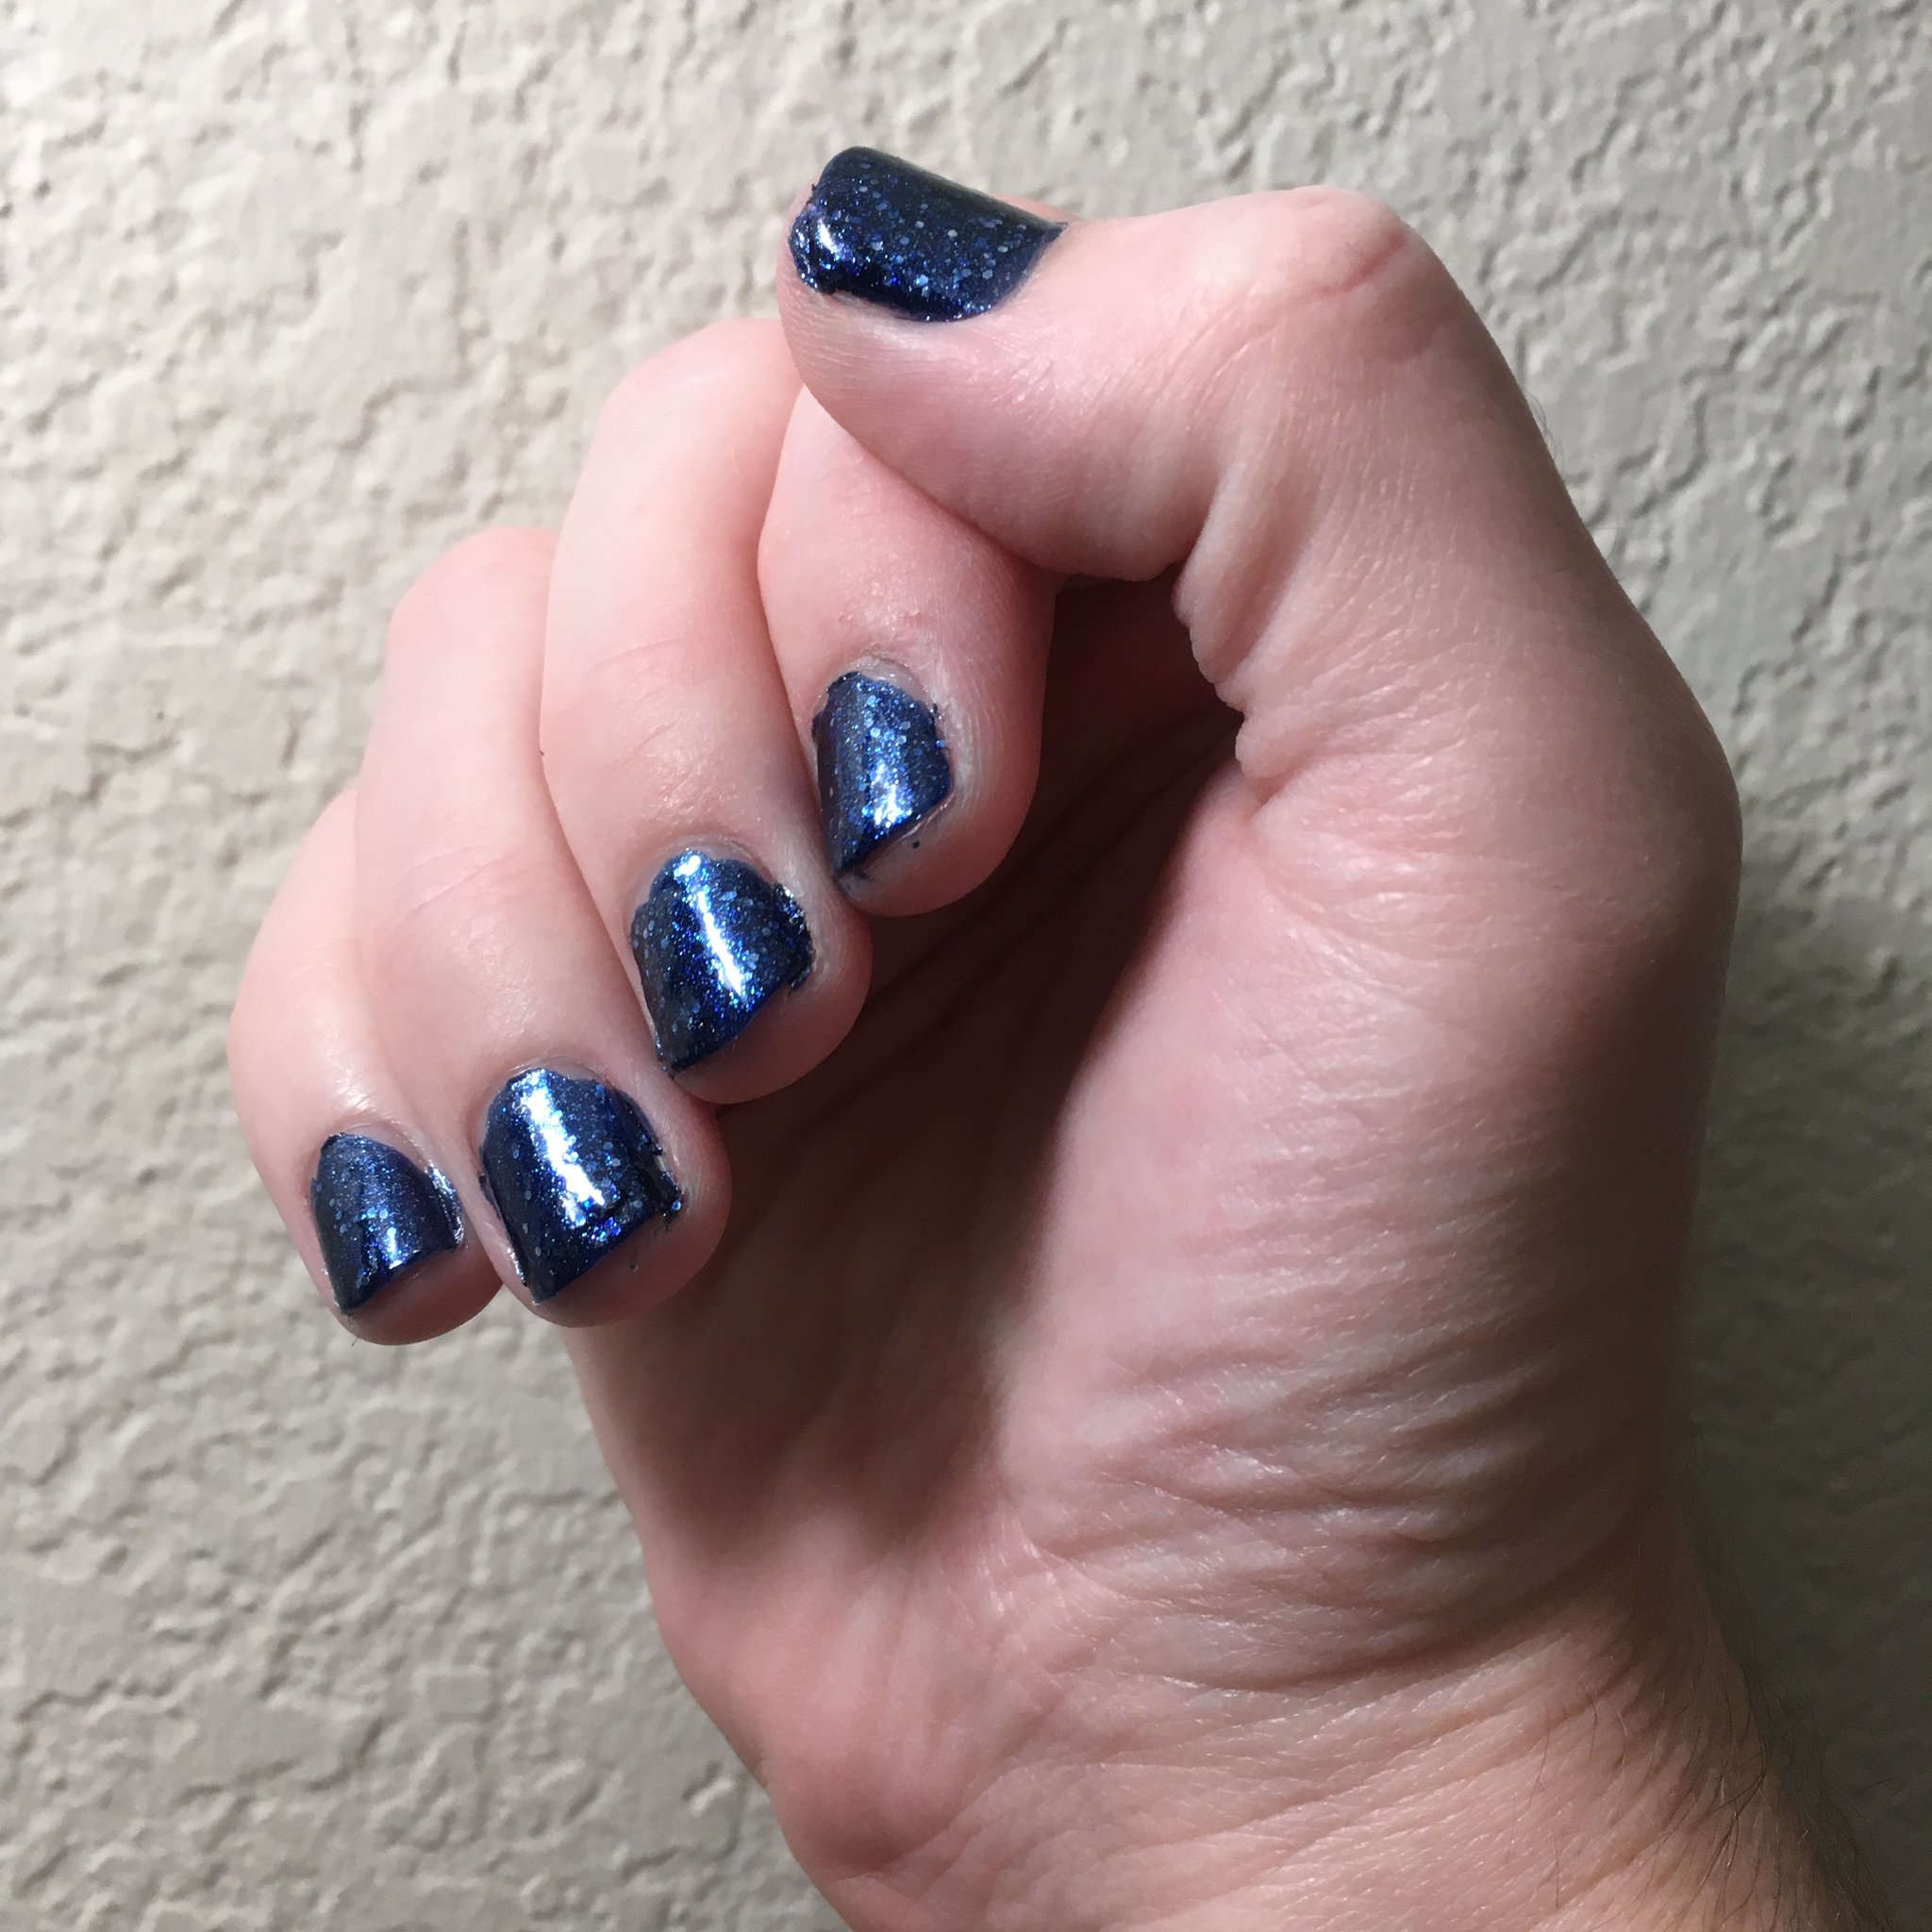 Essie #1659 “Once in a Blue Moon”, a dark blue polish with silver glitter.